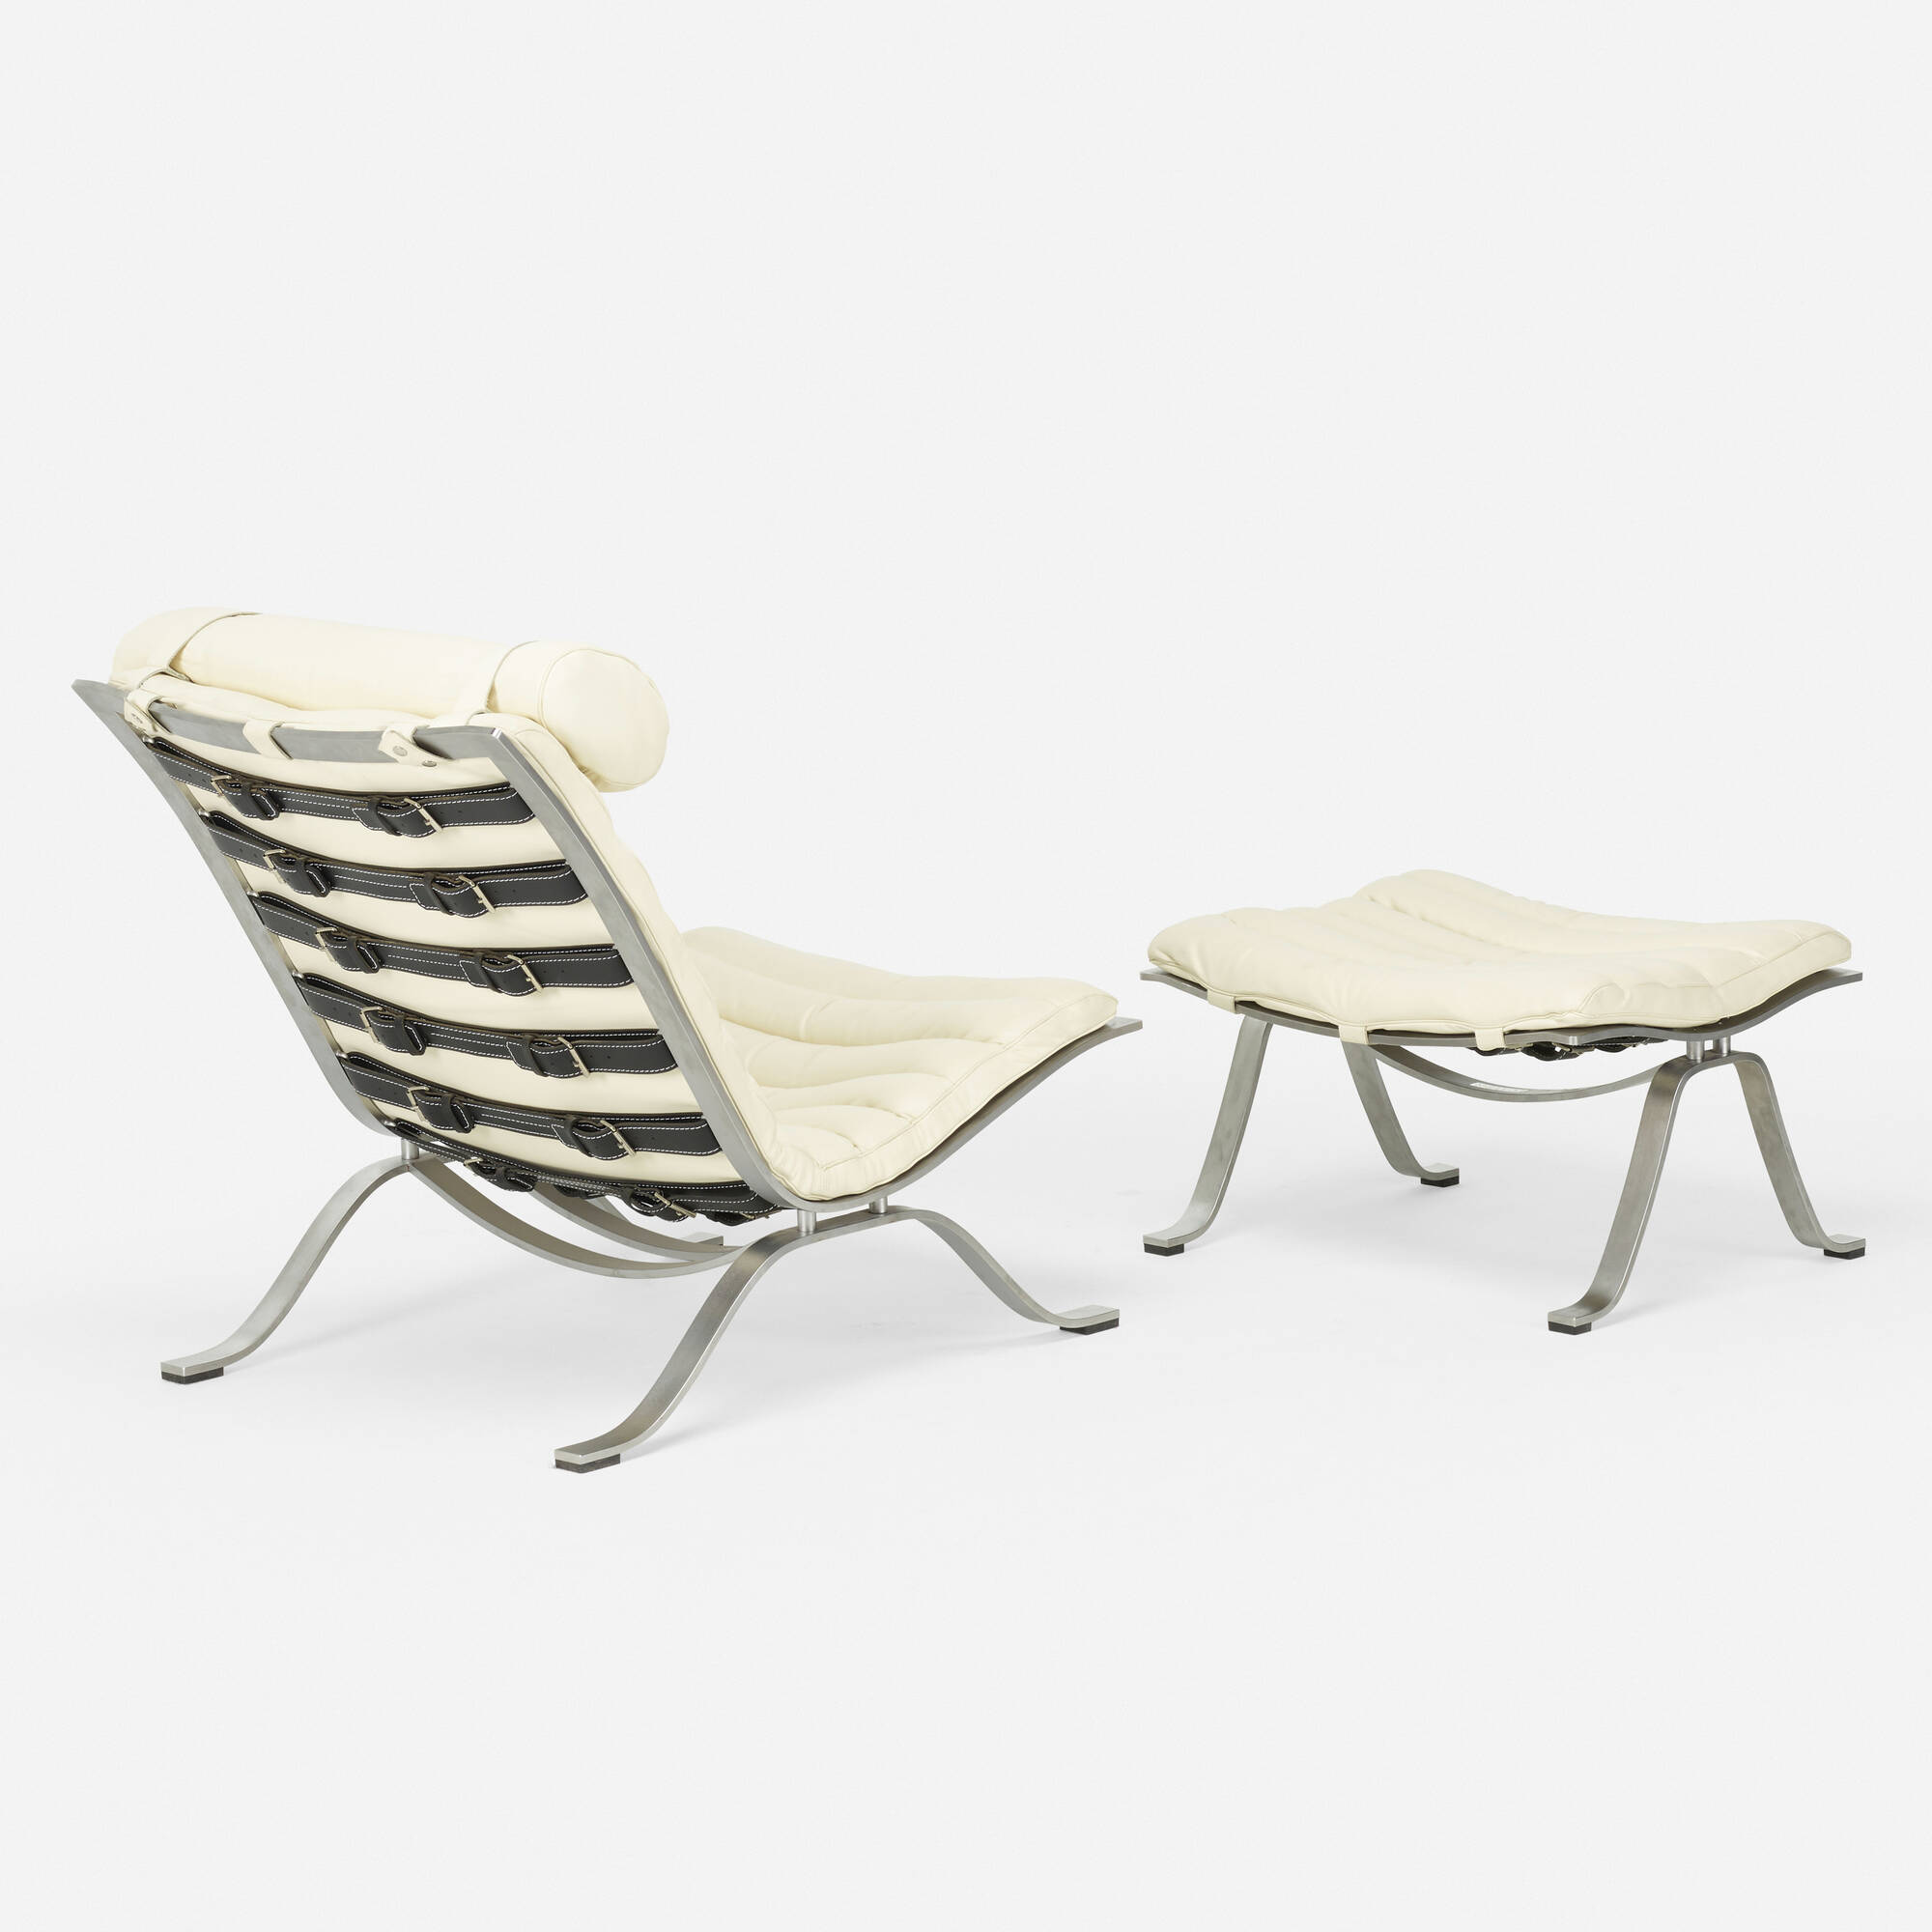 kartoffel håndtag præst 133: ARNE NORELL, Ari lounge chair and ottoman < Art + Design, 16 January  2020 < Auctions | Wright: Auctions of Art and Design